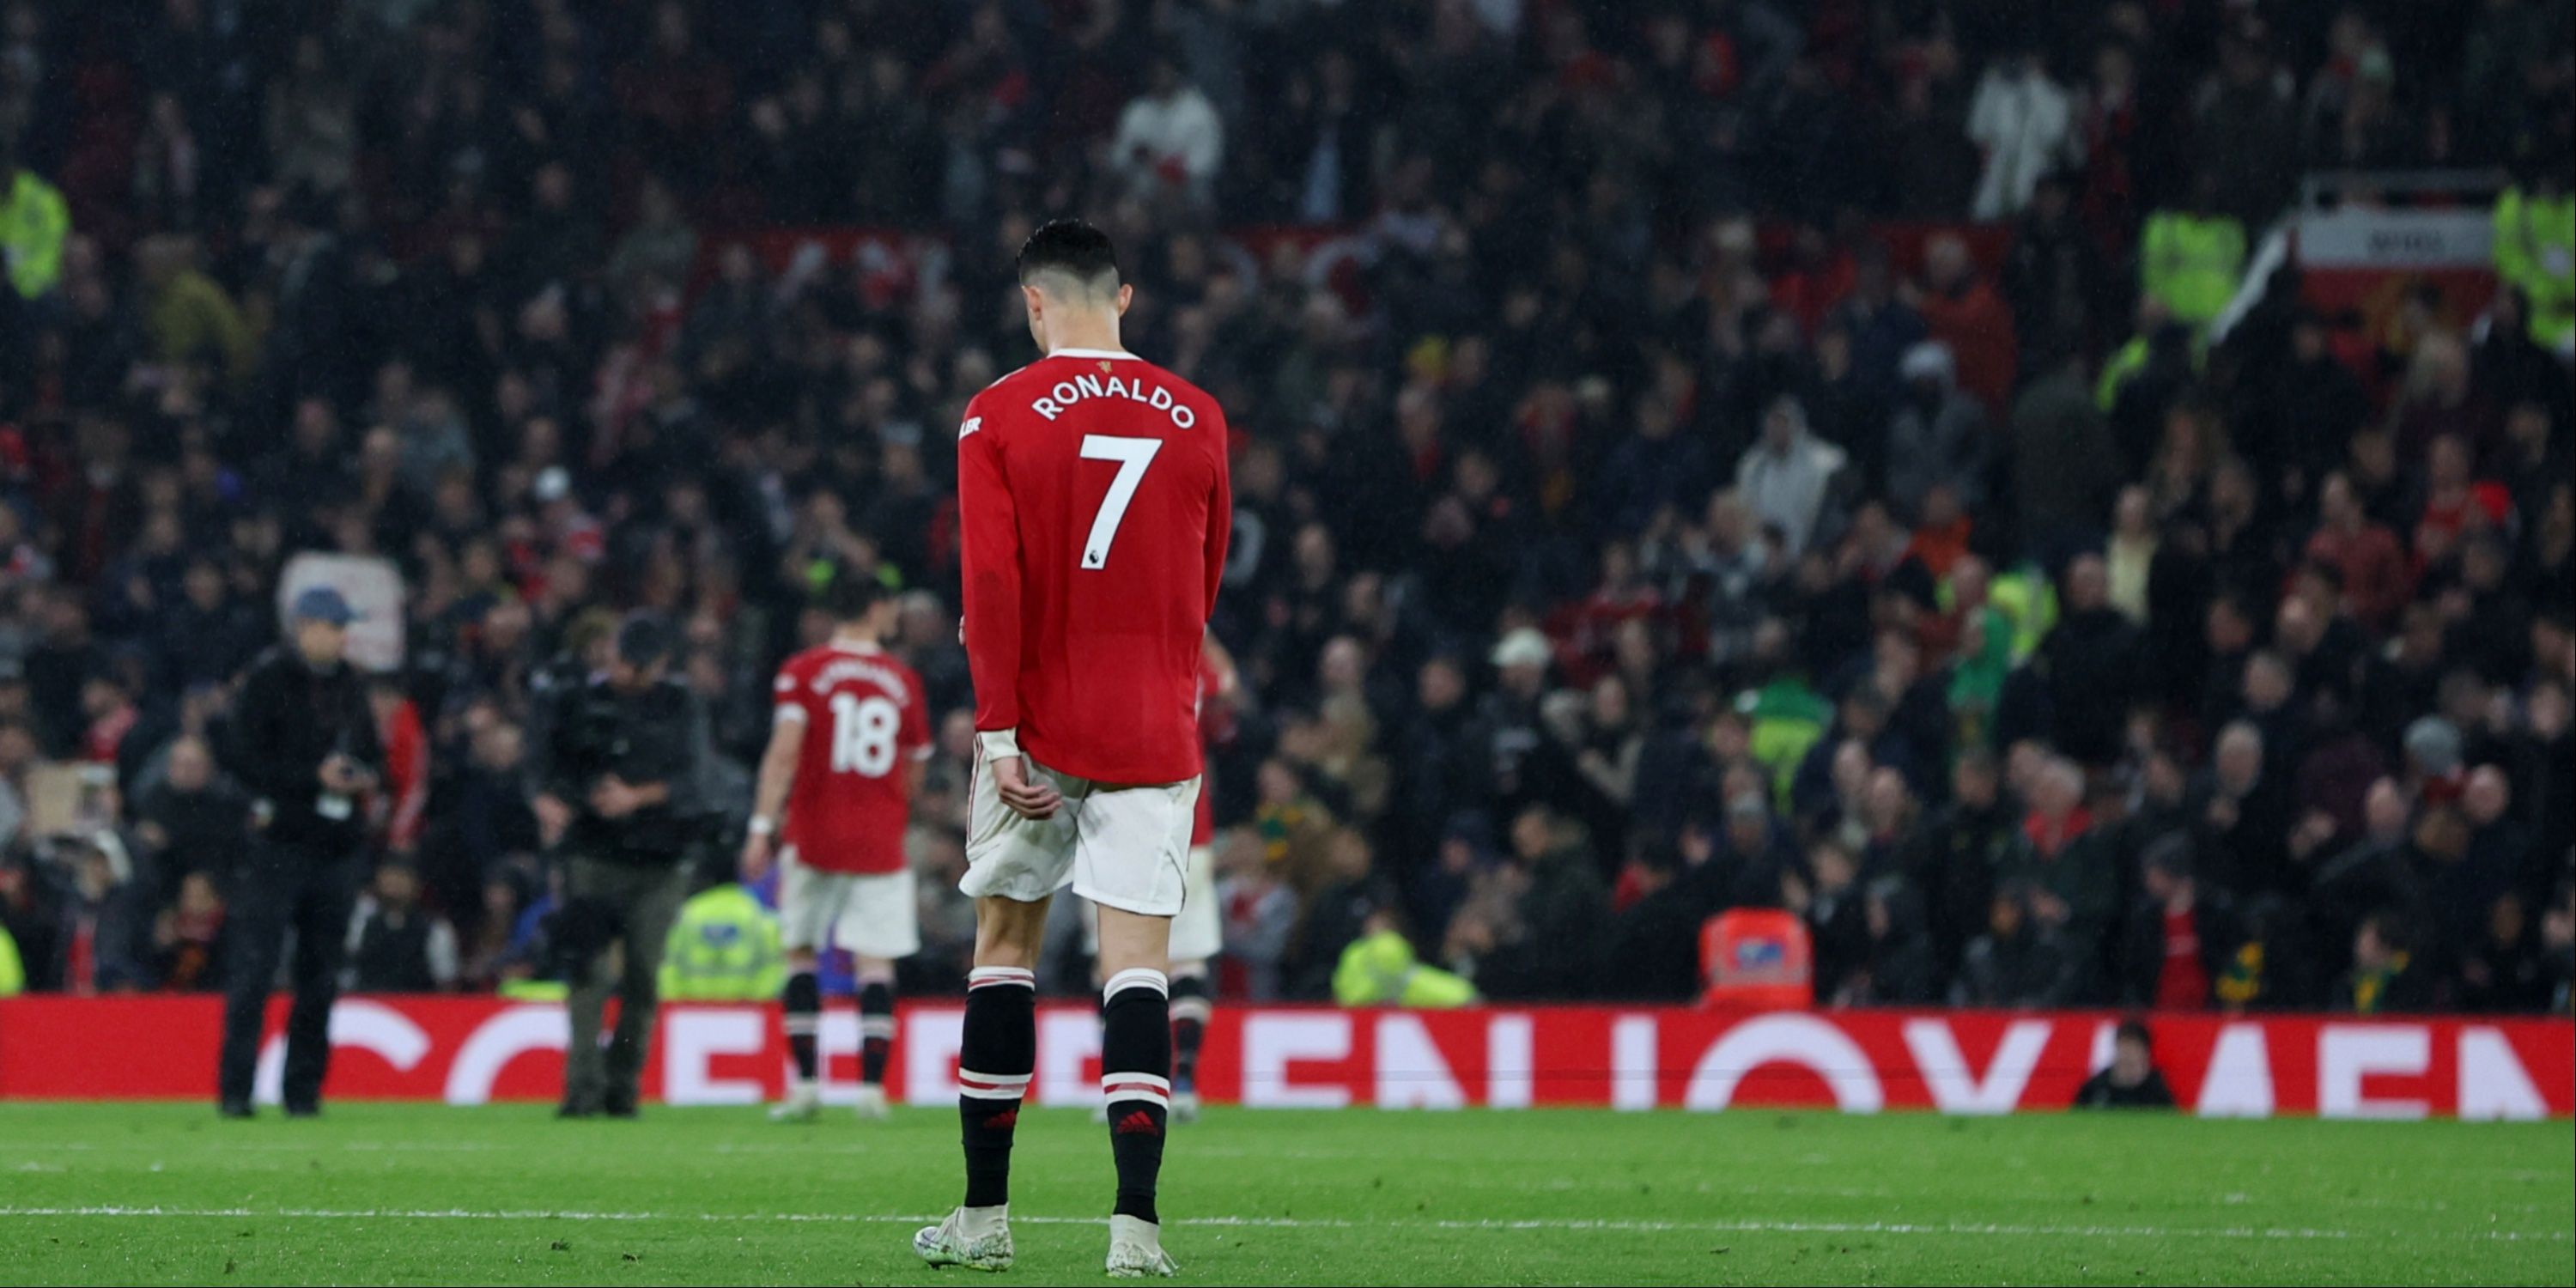 Manchester United's Cristiano Ronaldo walks off the pitch with his back to the camera, displaying the iconic no.7 on his back.